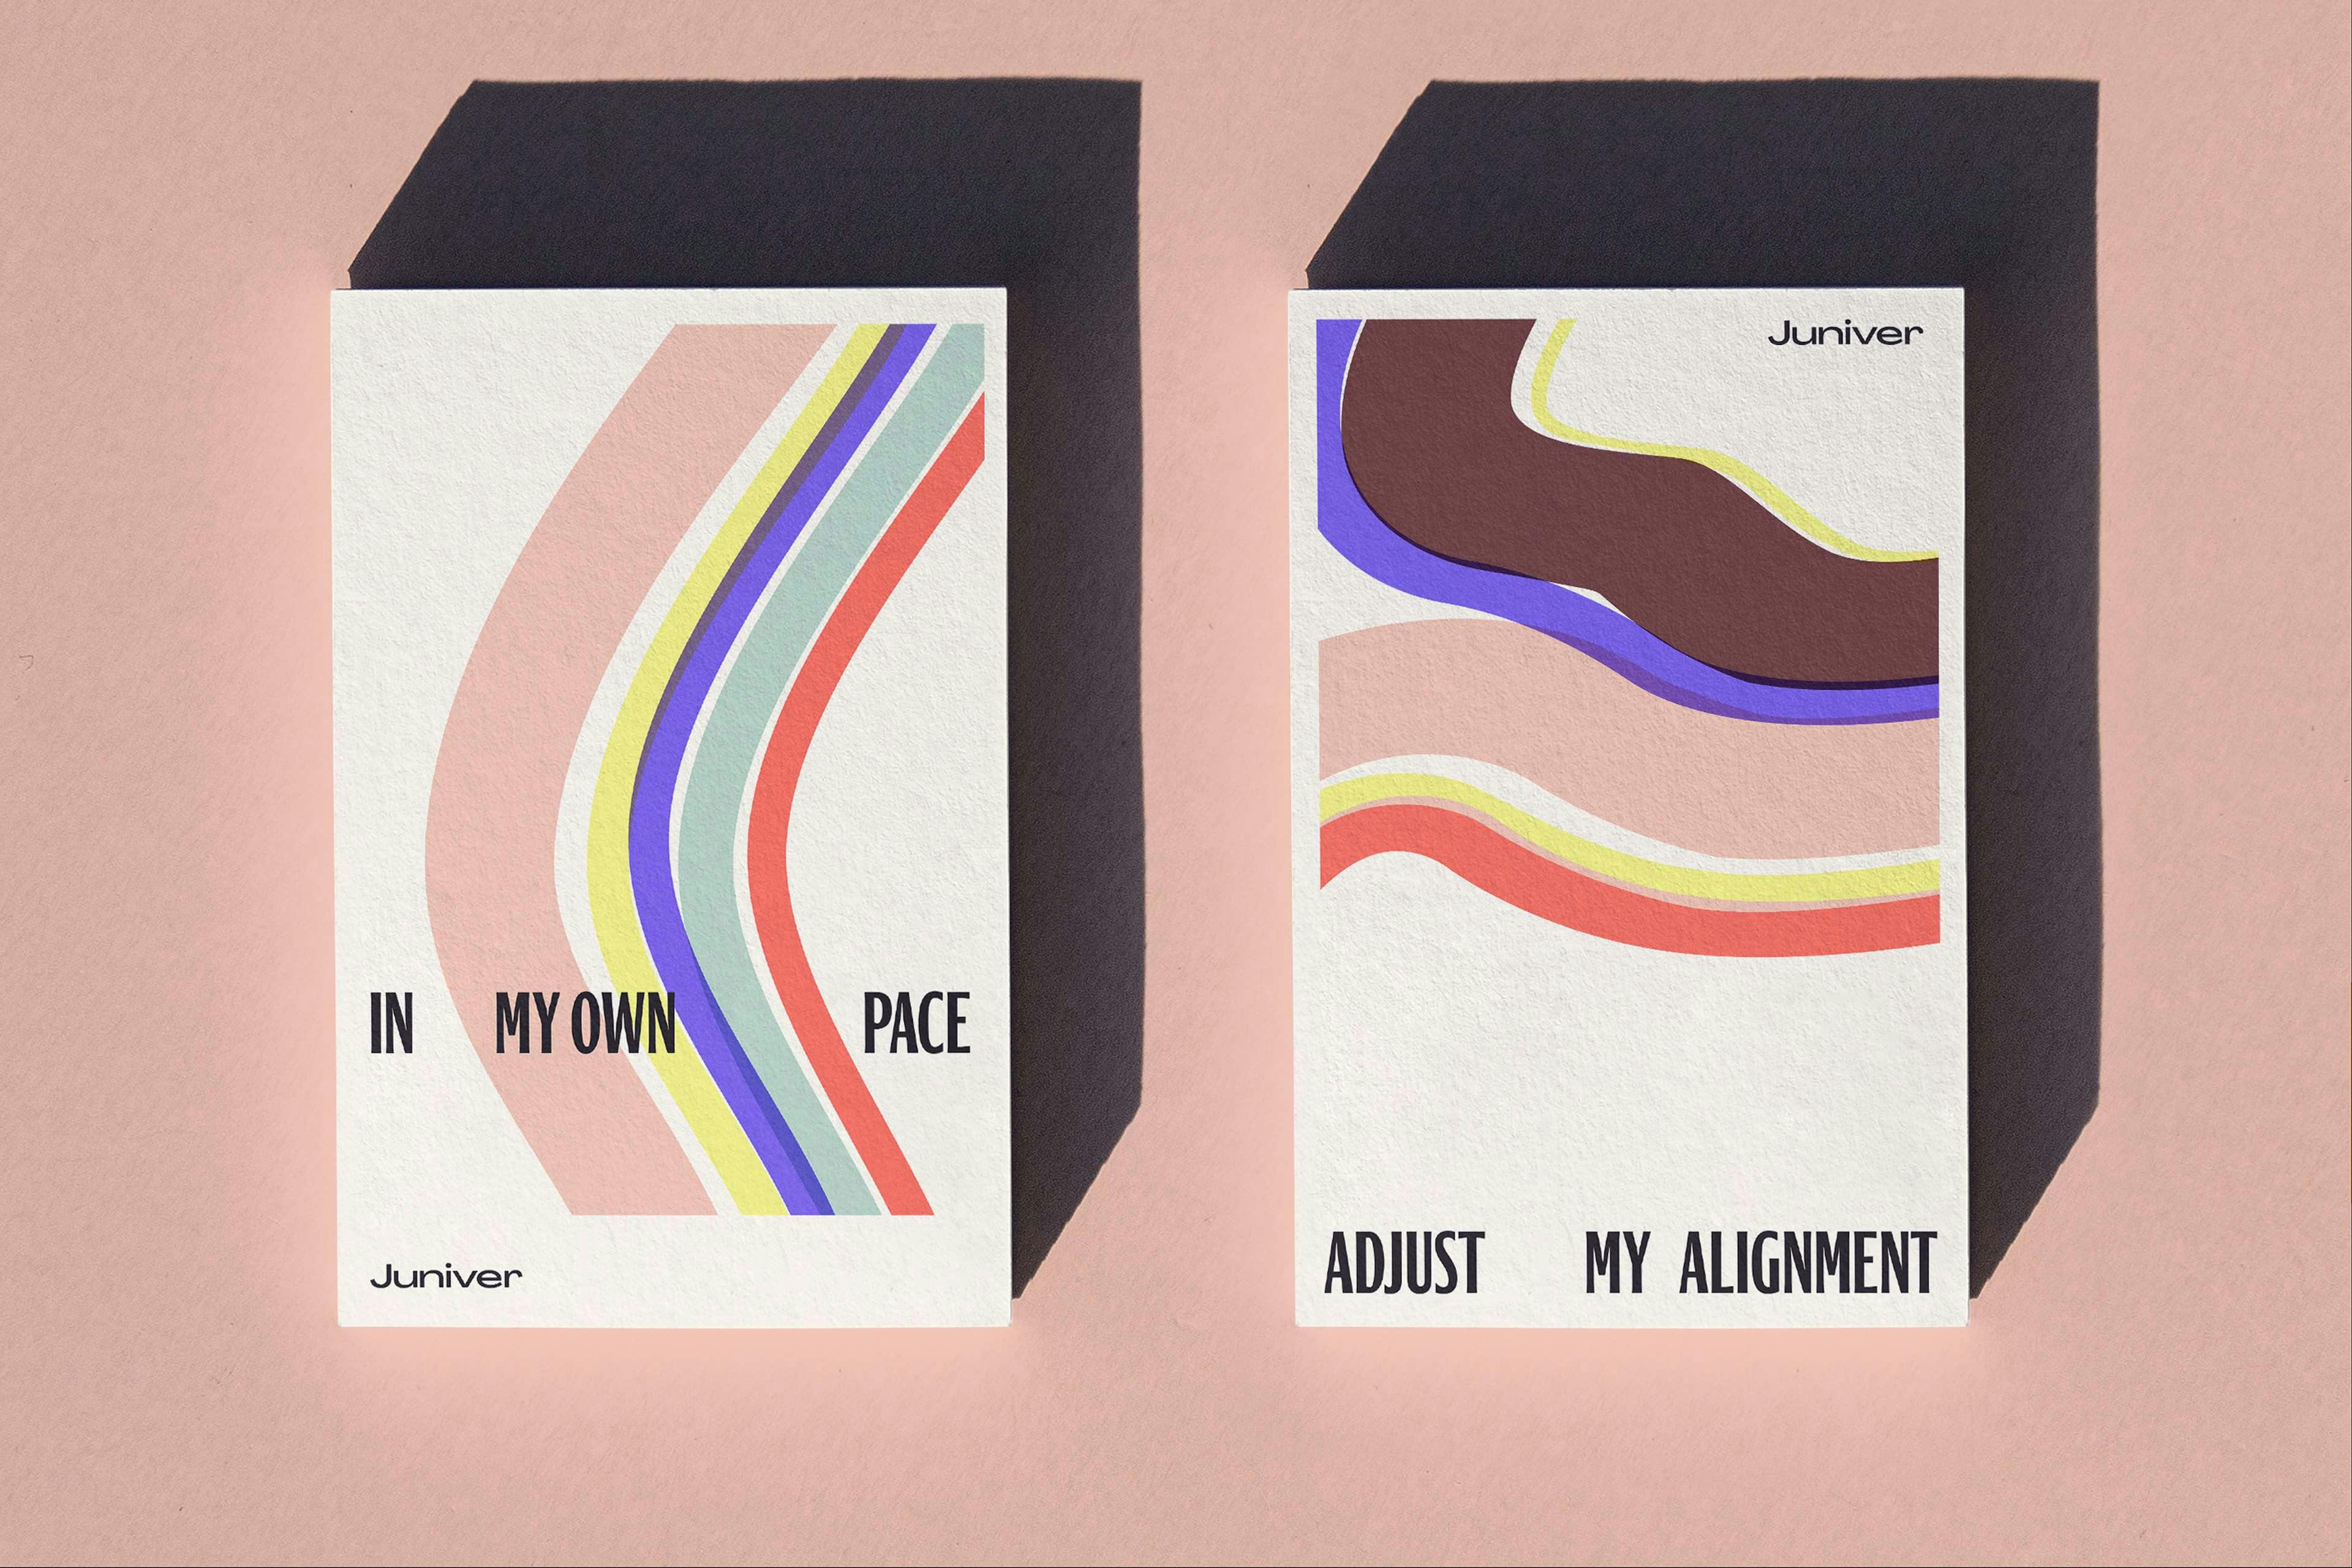 Juniver cards: In my own pace + Adjust my alignment